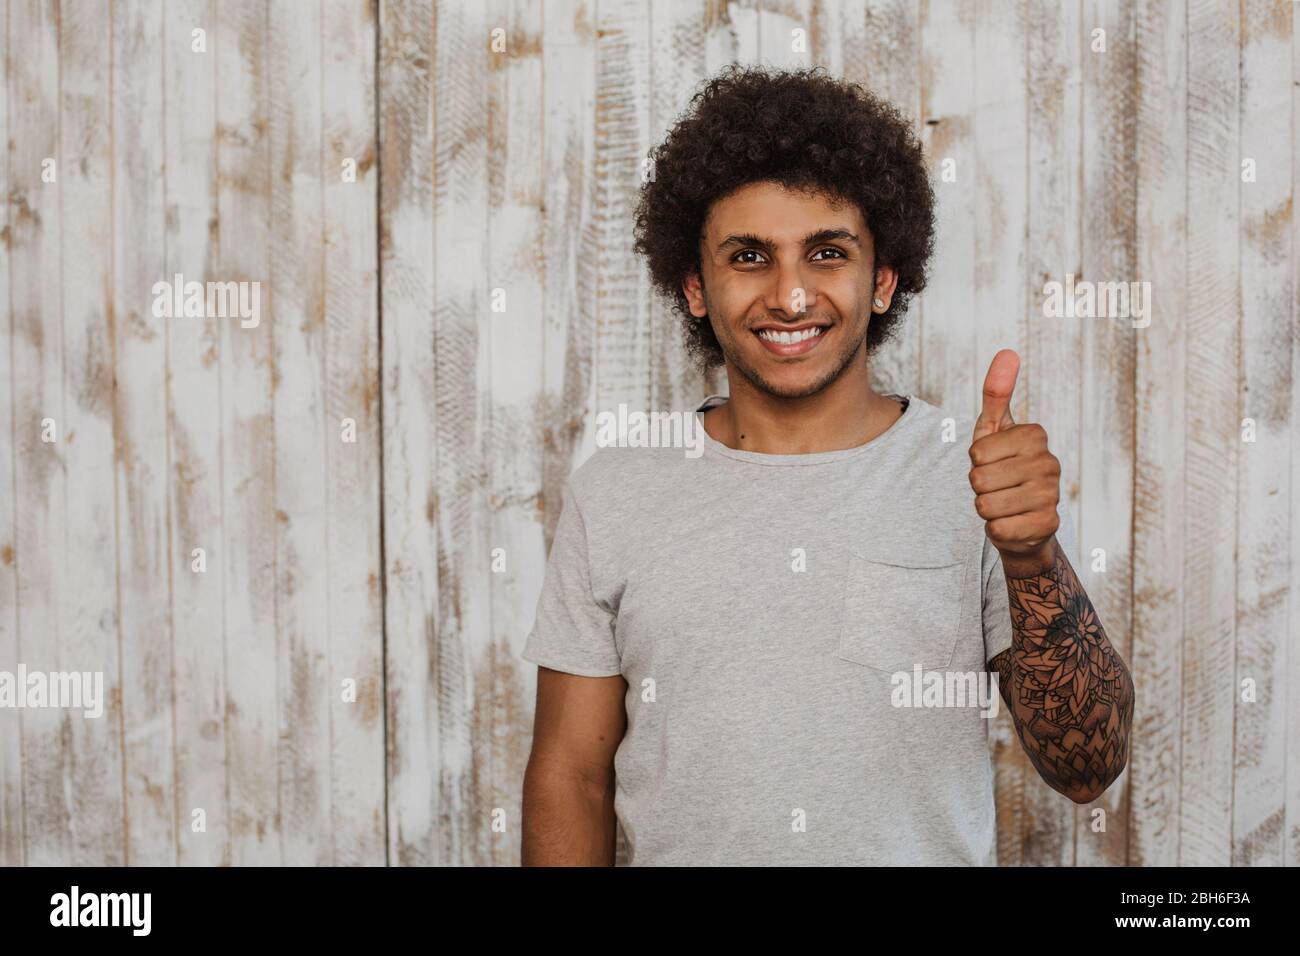 Do not worry be happy! Portrait cheerful curly haired man with perfect smile showing thumbs up. While standing against old wooden background Stock Photo